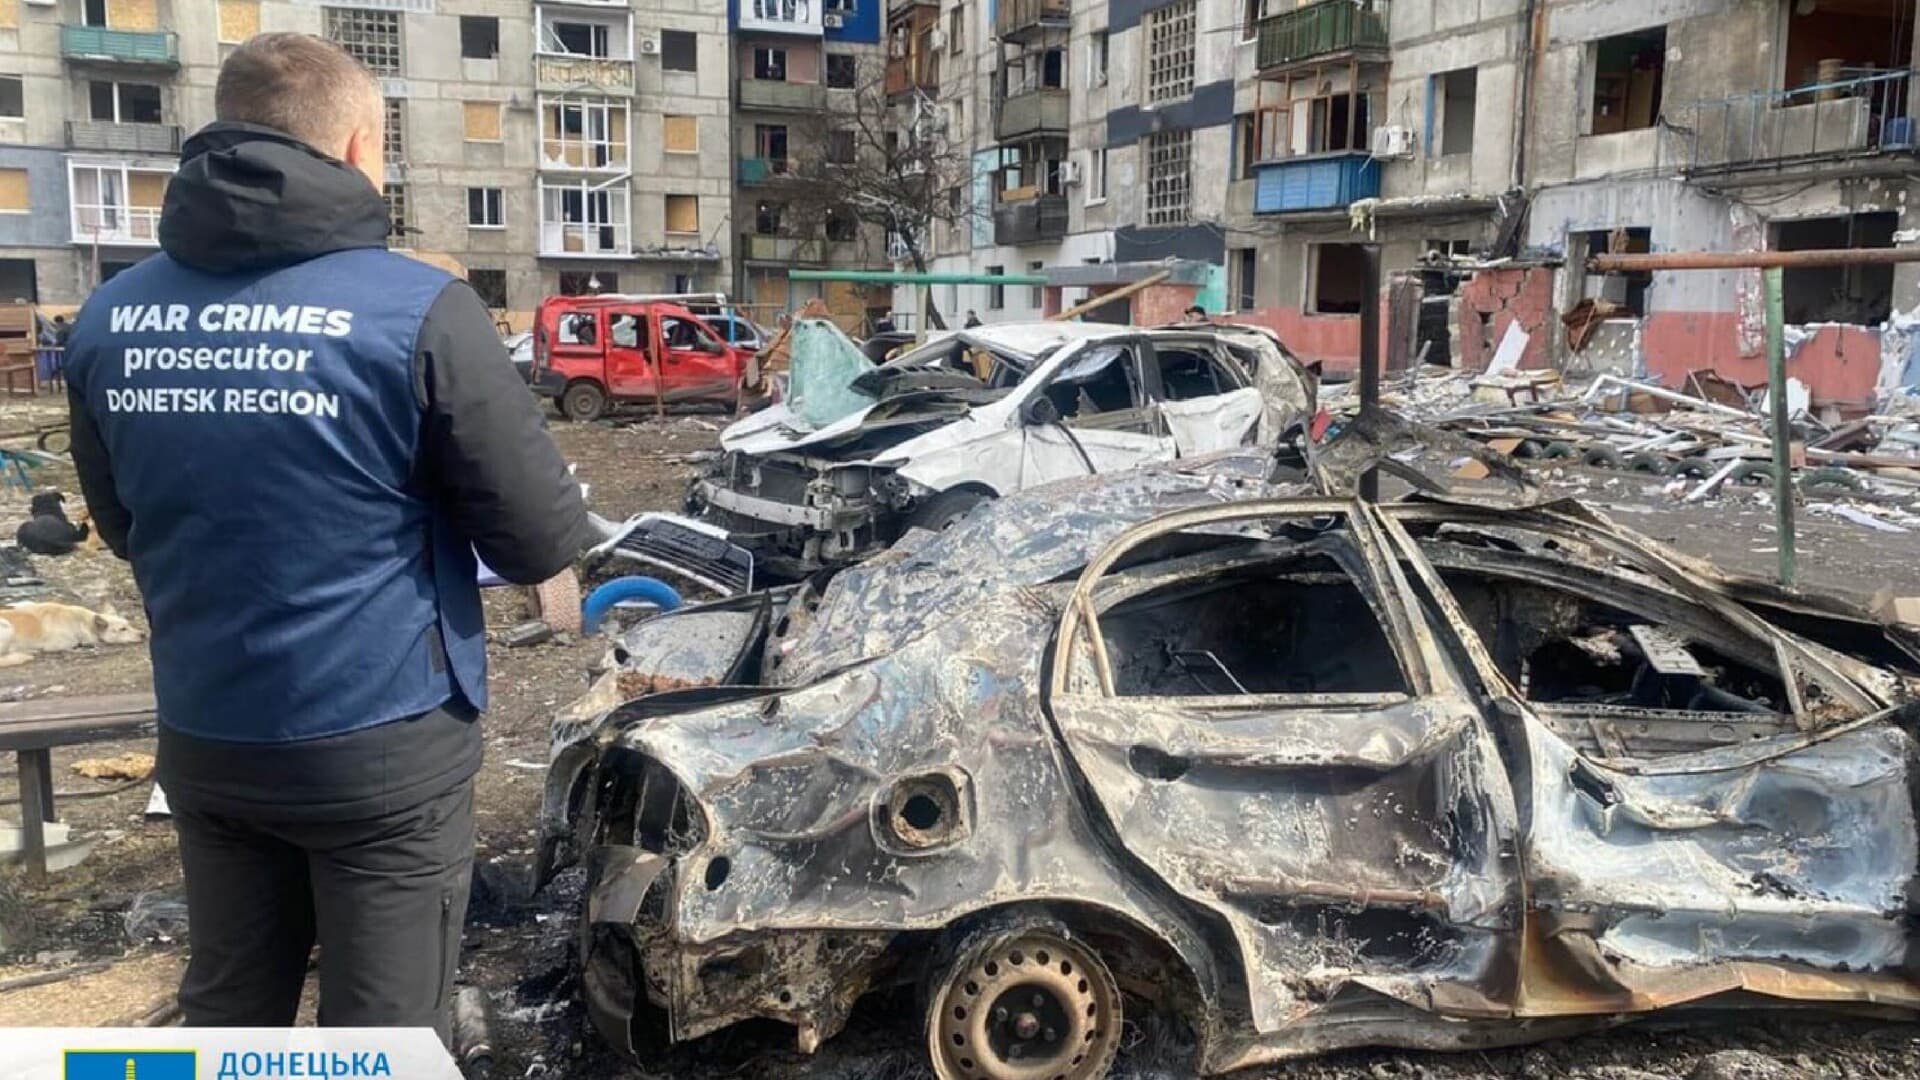 A war crimes prosecutor standing next to destroyed cars in the courtyard of a damaged residential building following a missile attack in Myrnohrad